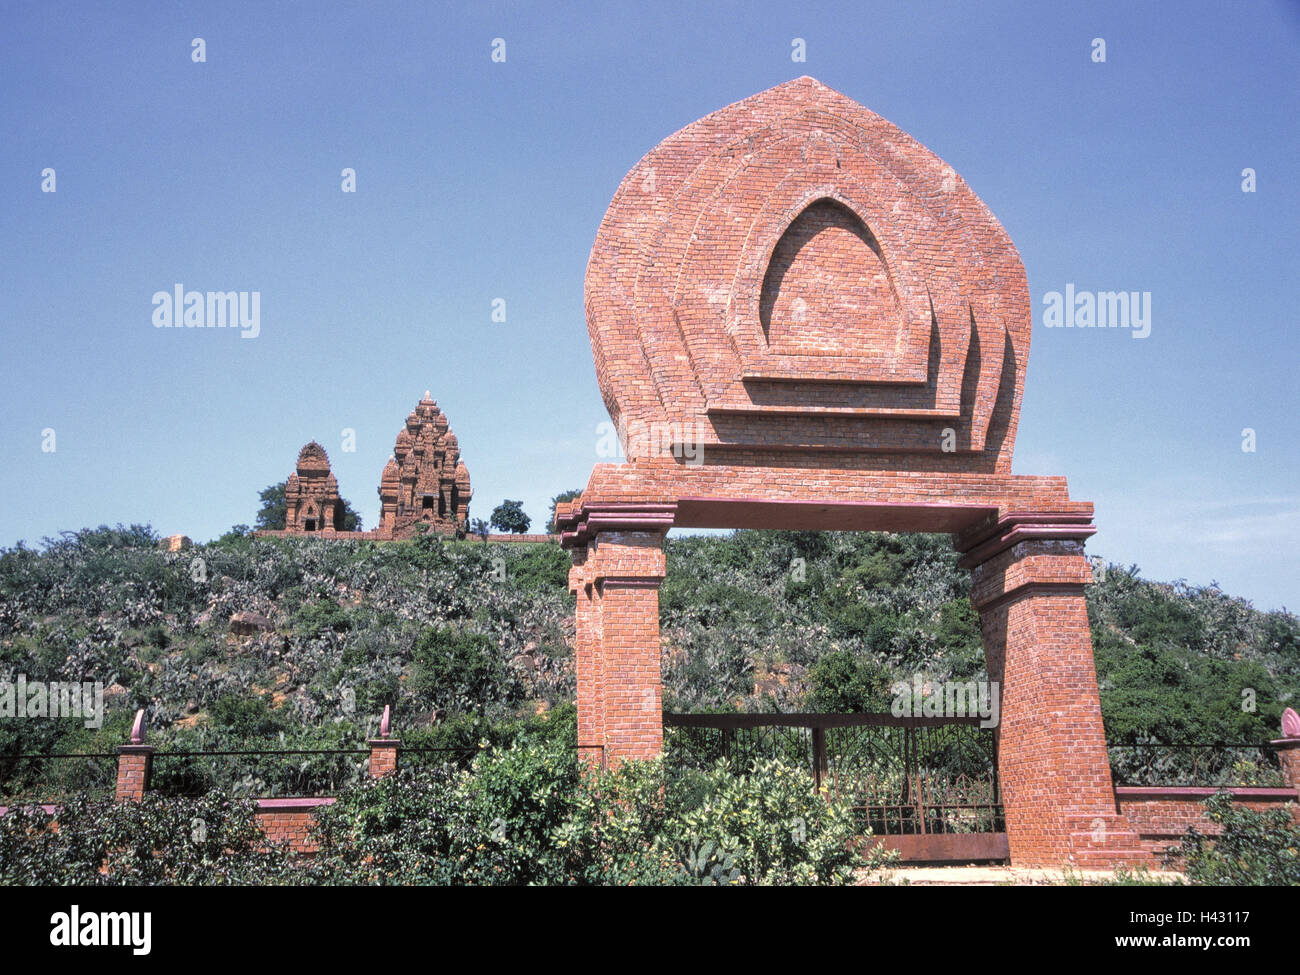 Vietnam, Phan Rang-Thap Cham, hill, Cham temple Asia, South-East Asia, Công Hòa X Æ Hôi Chu Nghia Viêt Nam, hill, temple, temple plant, Hindu, structures, historically, religiously, towers, Cham towers, Cham shrine, culture, landmark, place of interest Stock Photo